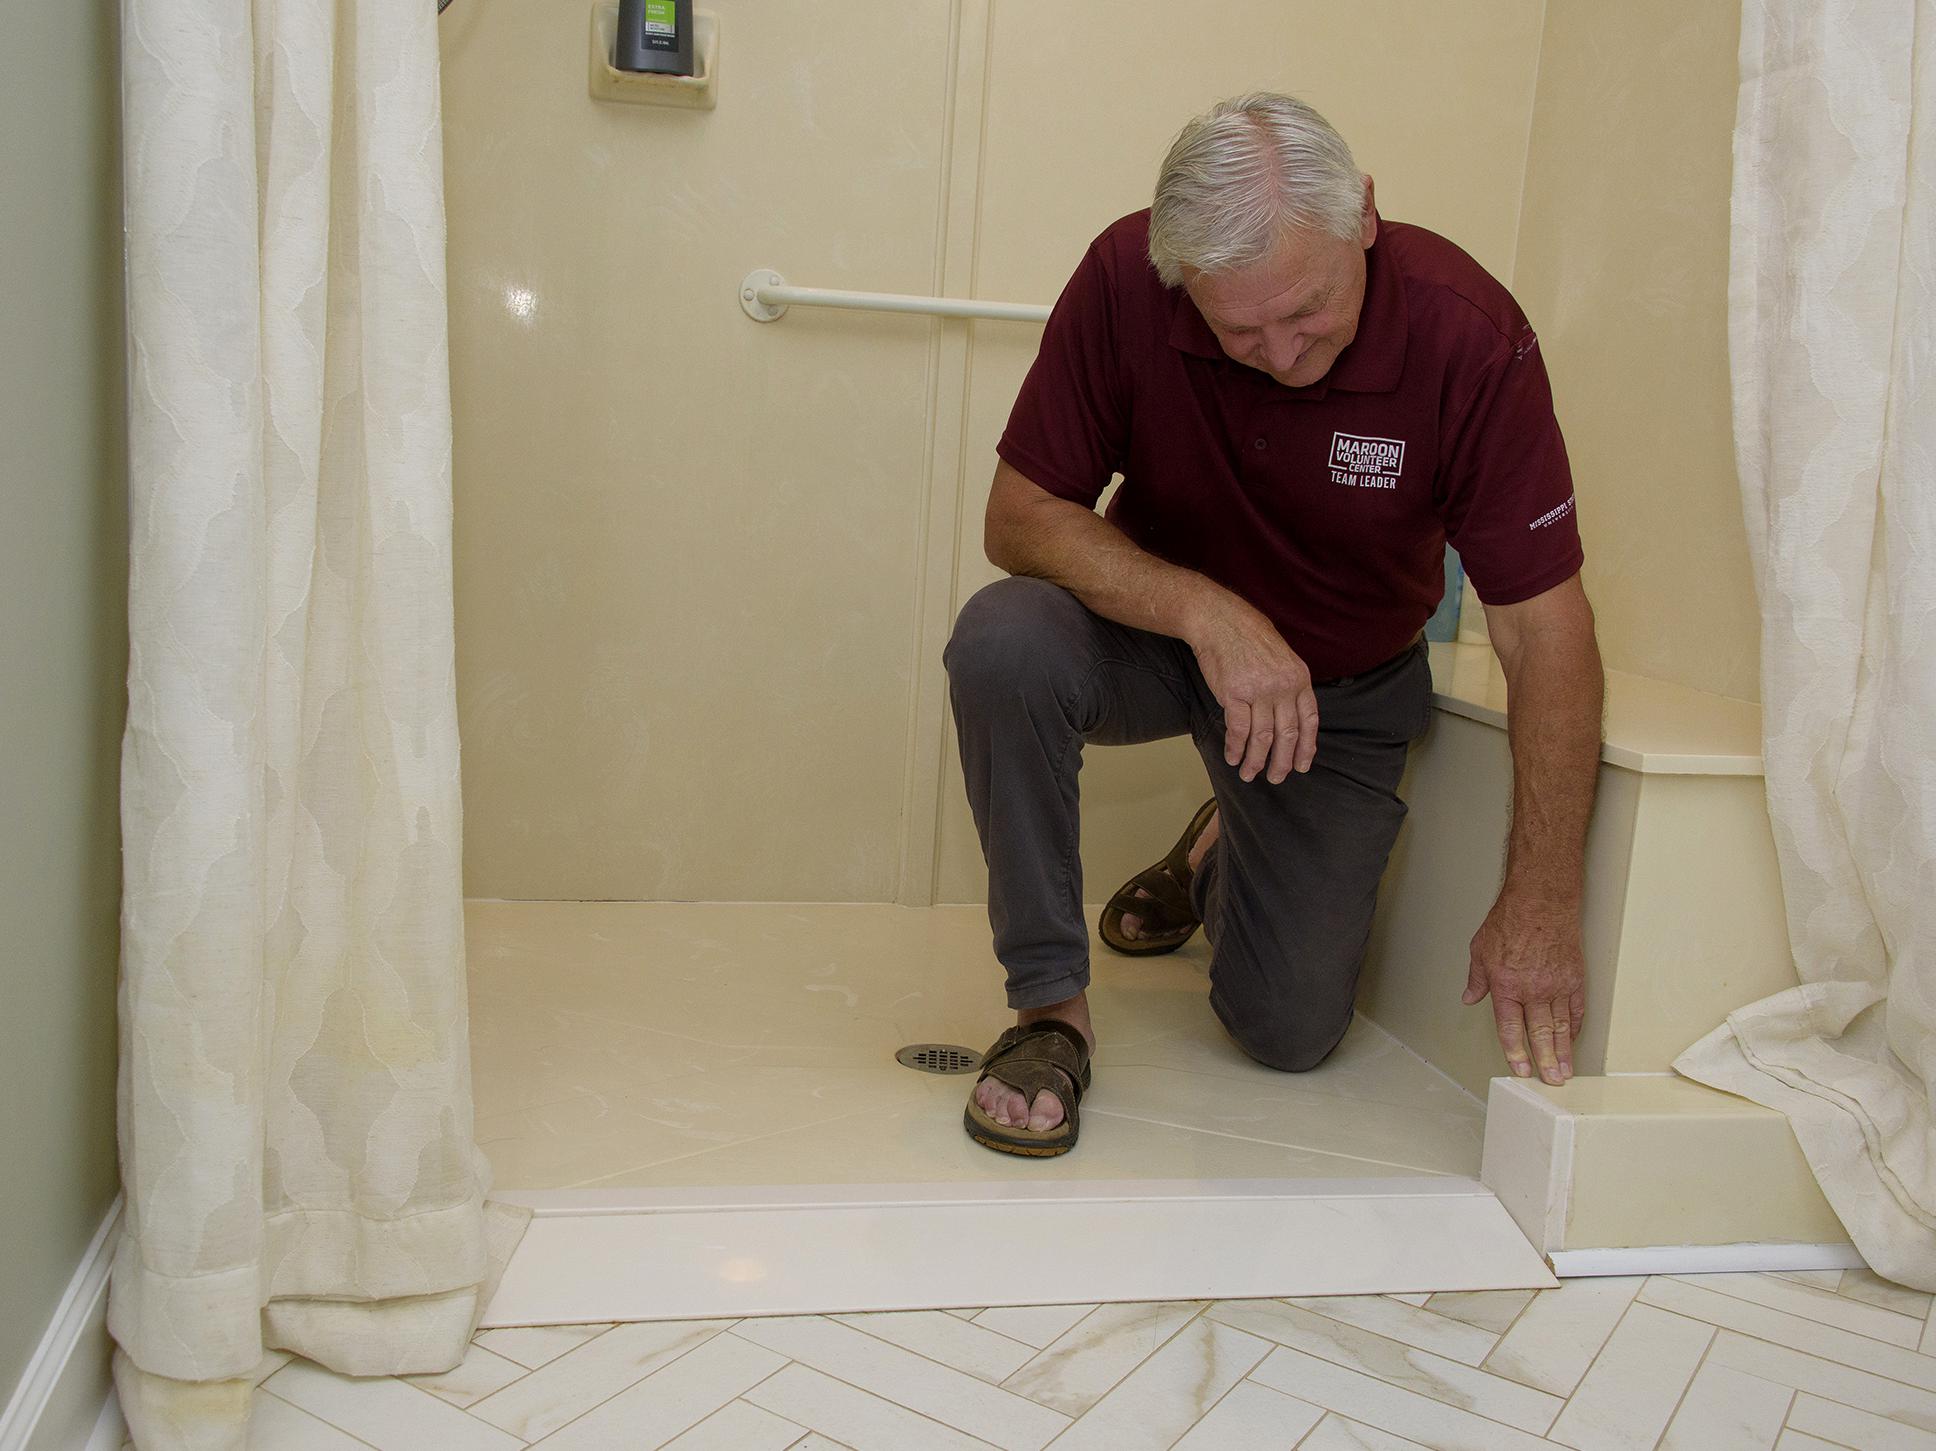 A man kneels in a walk-in shower, reaching down to a point in the entryway.